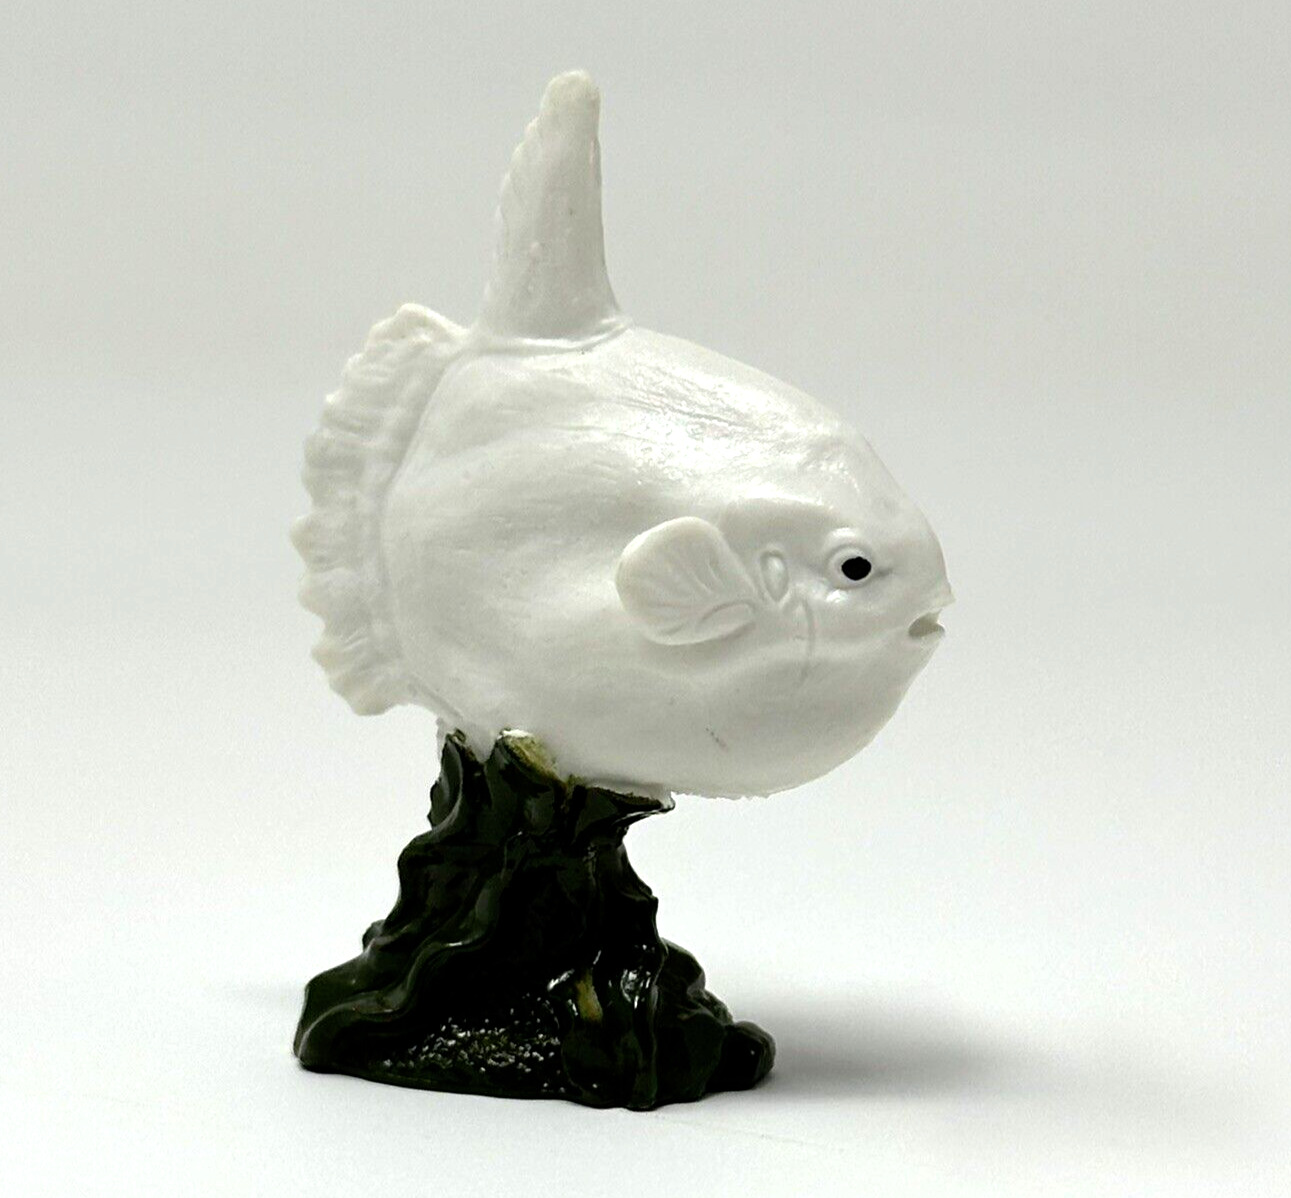 YOWIE Ocean Sunfish Collectible Toy Animal White Fish Wild Water Collection 2